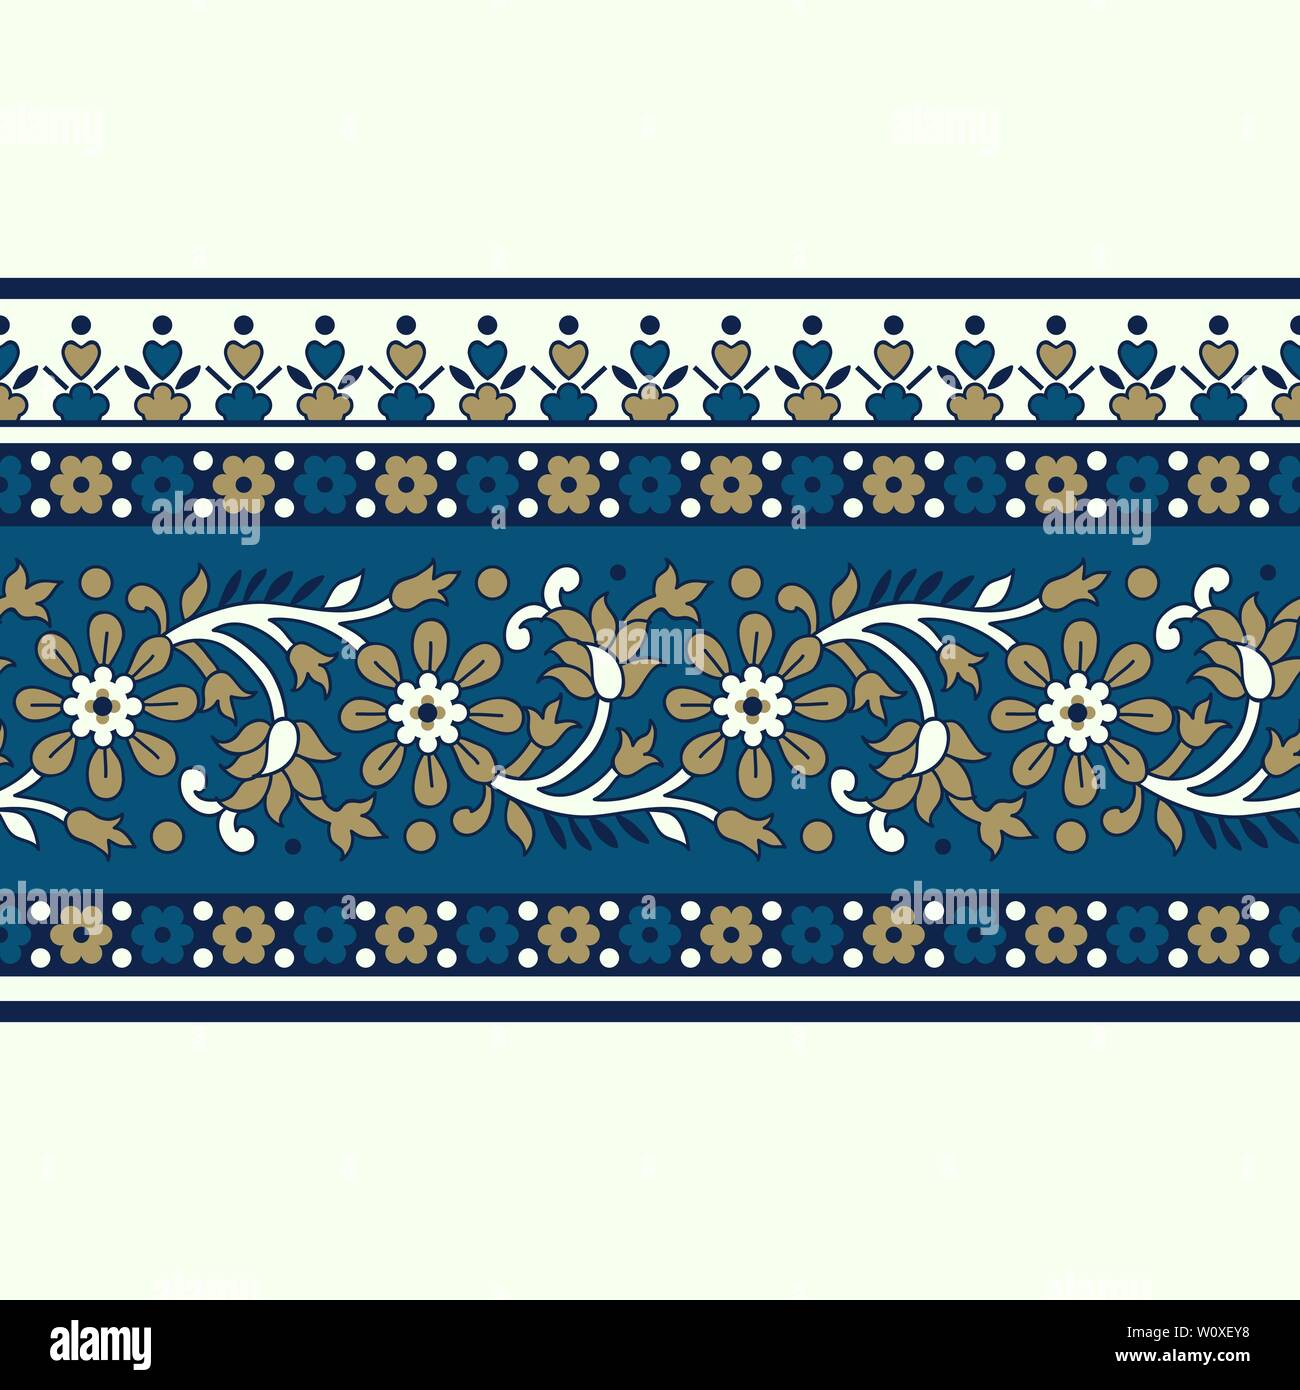 Woodblock printed indigo dye seamless ethnic floral border. Traditional oriental ornament of India, meander motif with flowers, gold and blue on ecru. Stock Vector